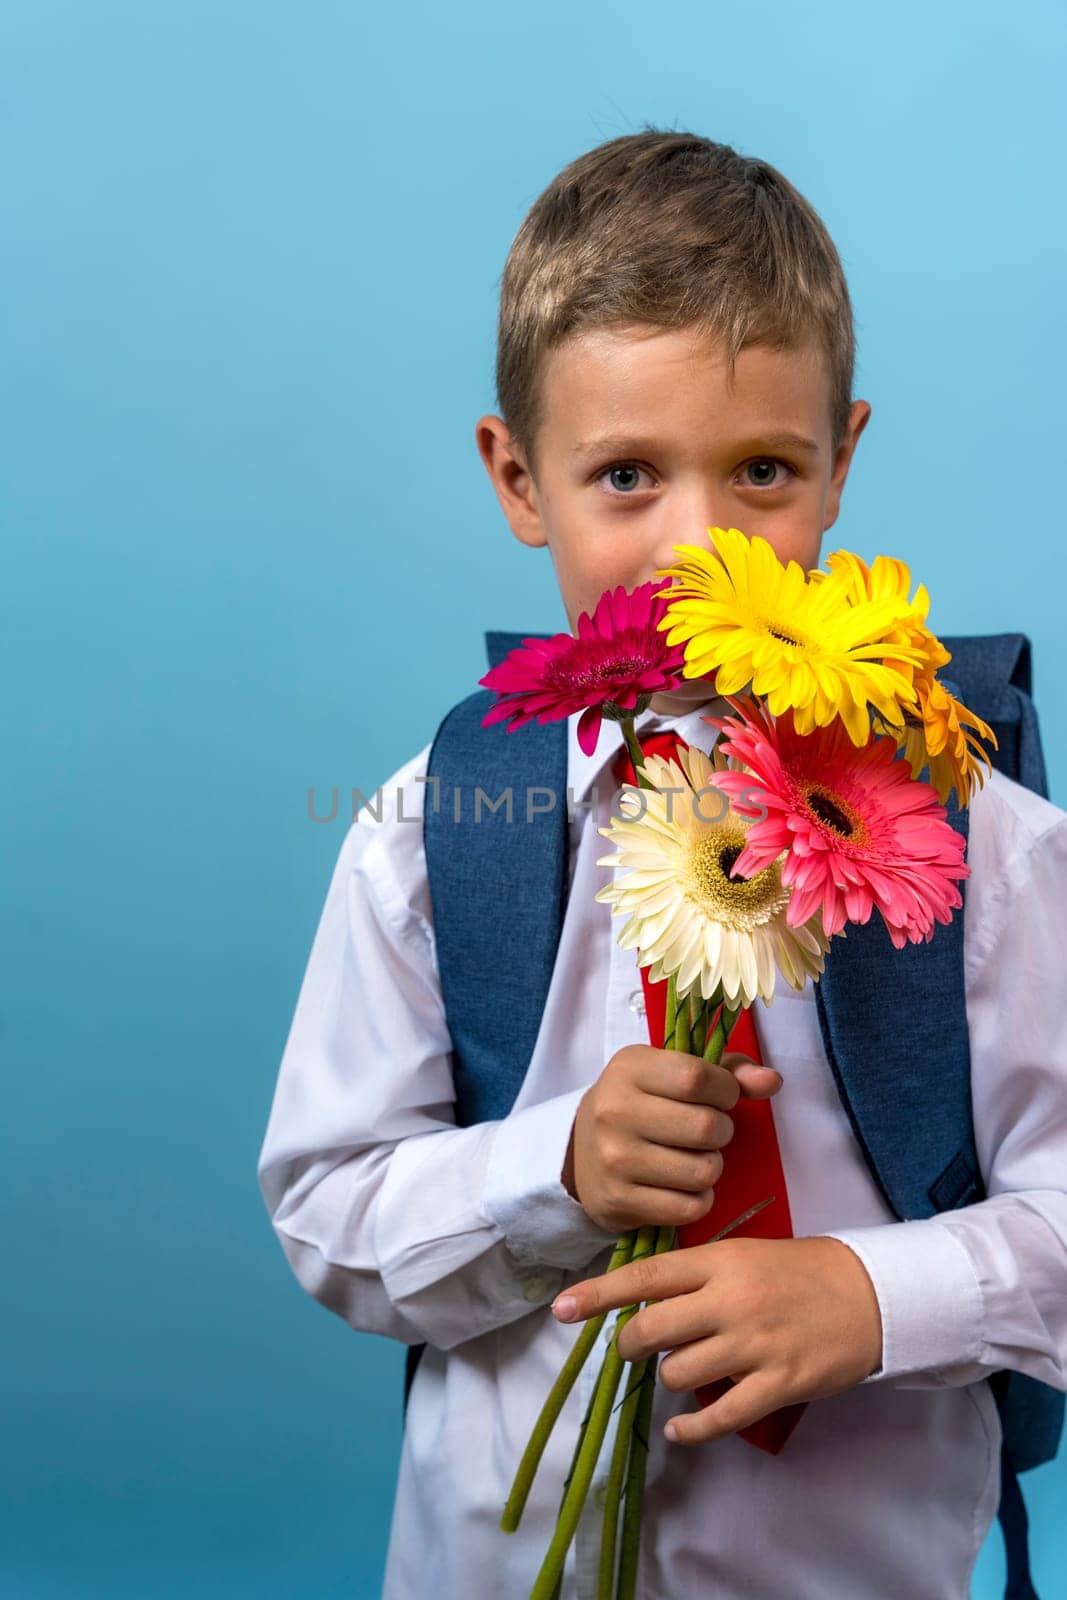 first grader with a backpack holds a bouquet of flowers by audiznam2609